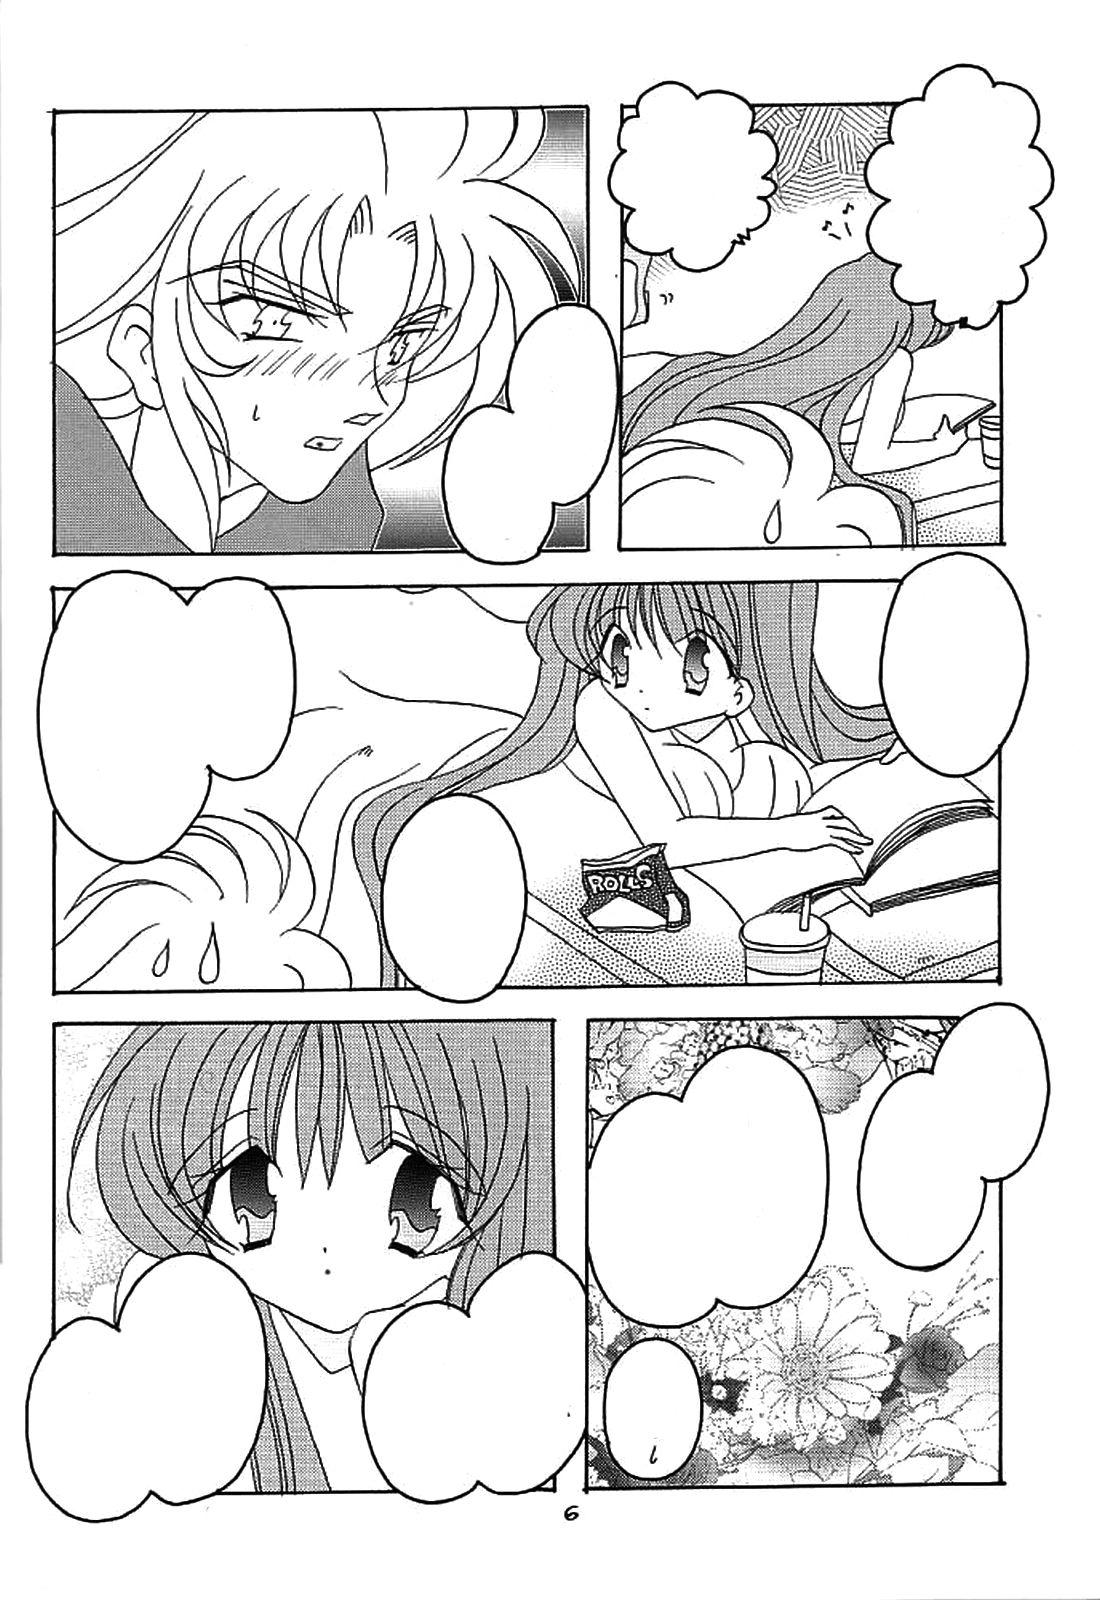 Hottie You are my Reason to Be 6 - Saint seiya Parties - Page 5